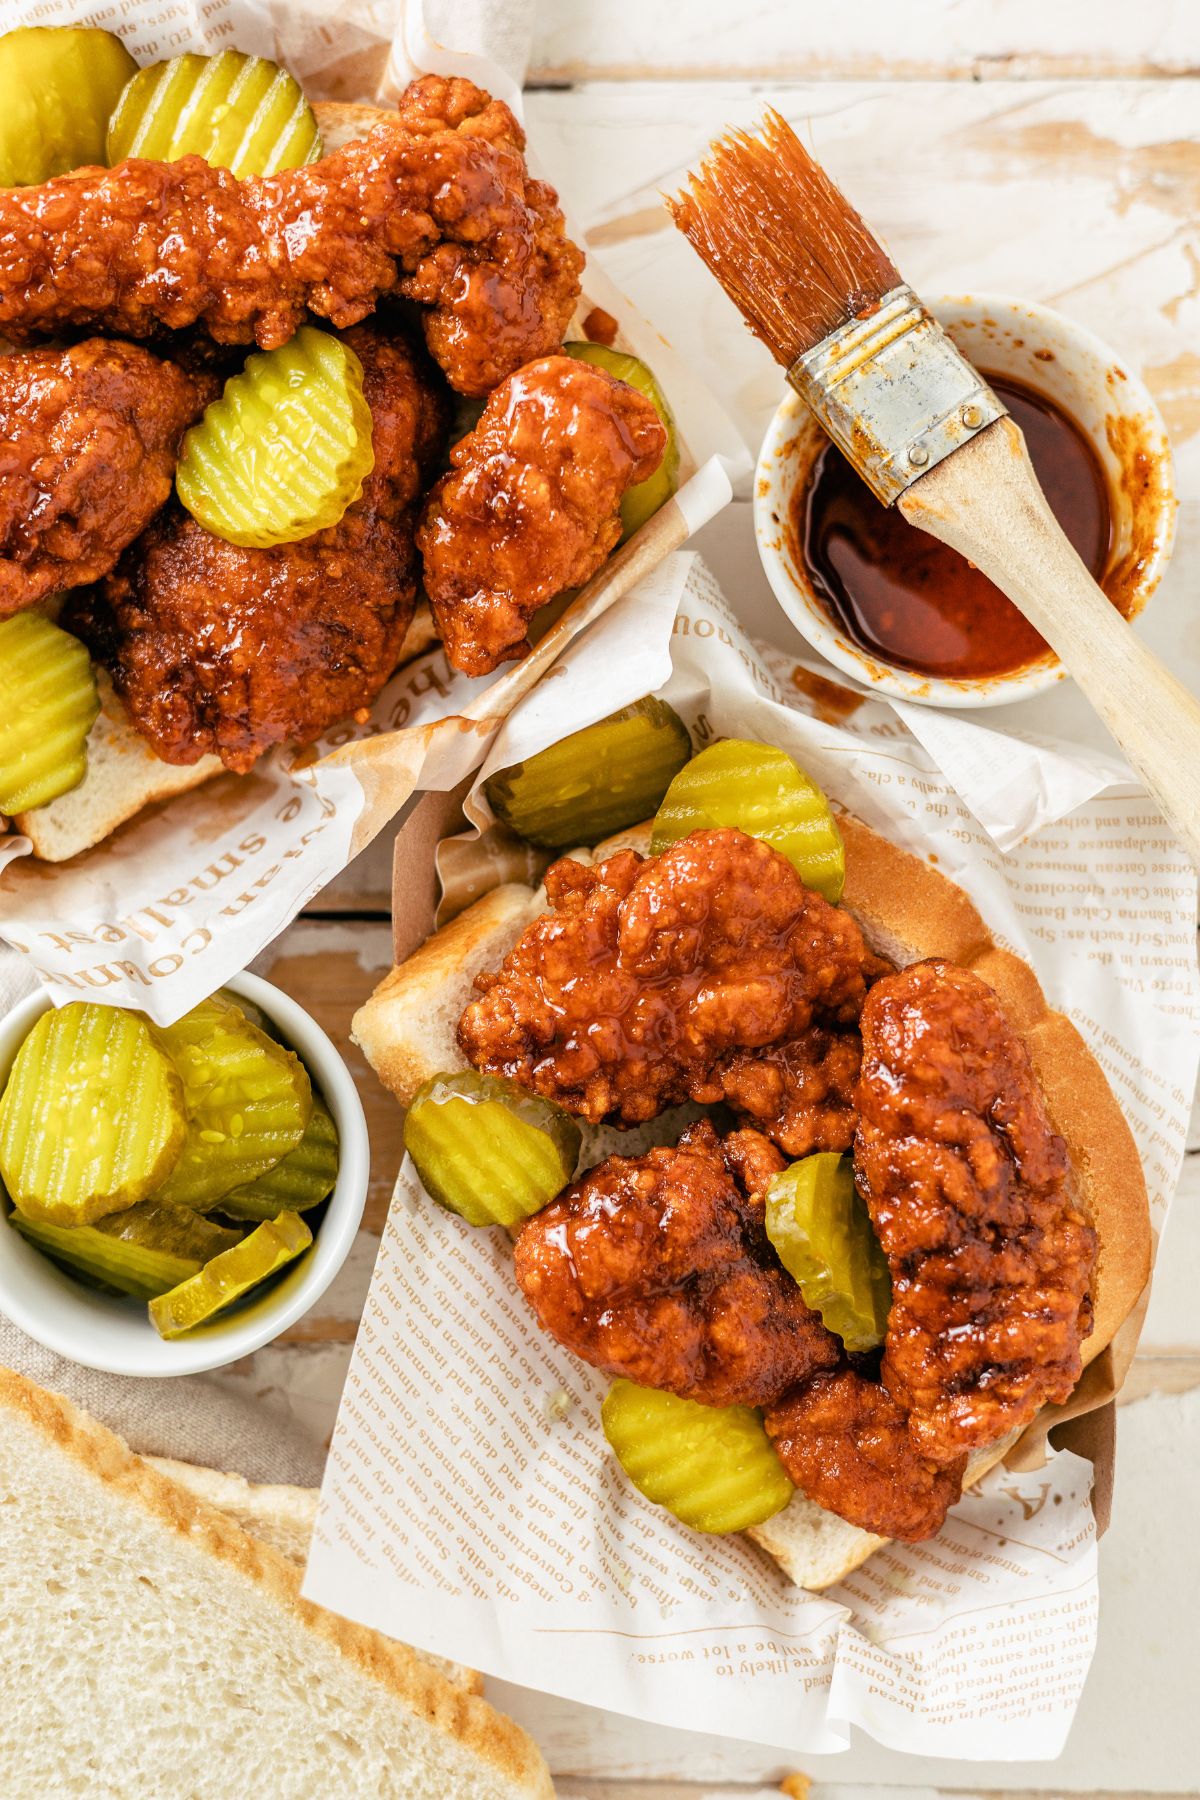 Nashville Hot Chicken Tenders in a basket with pickles and white bread